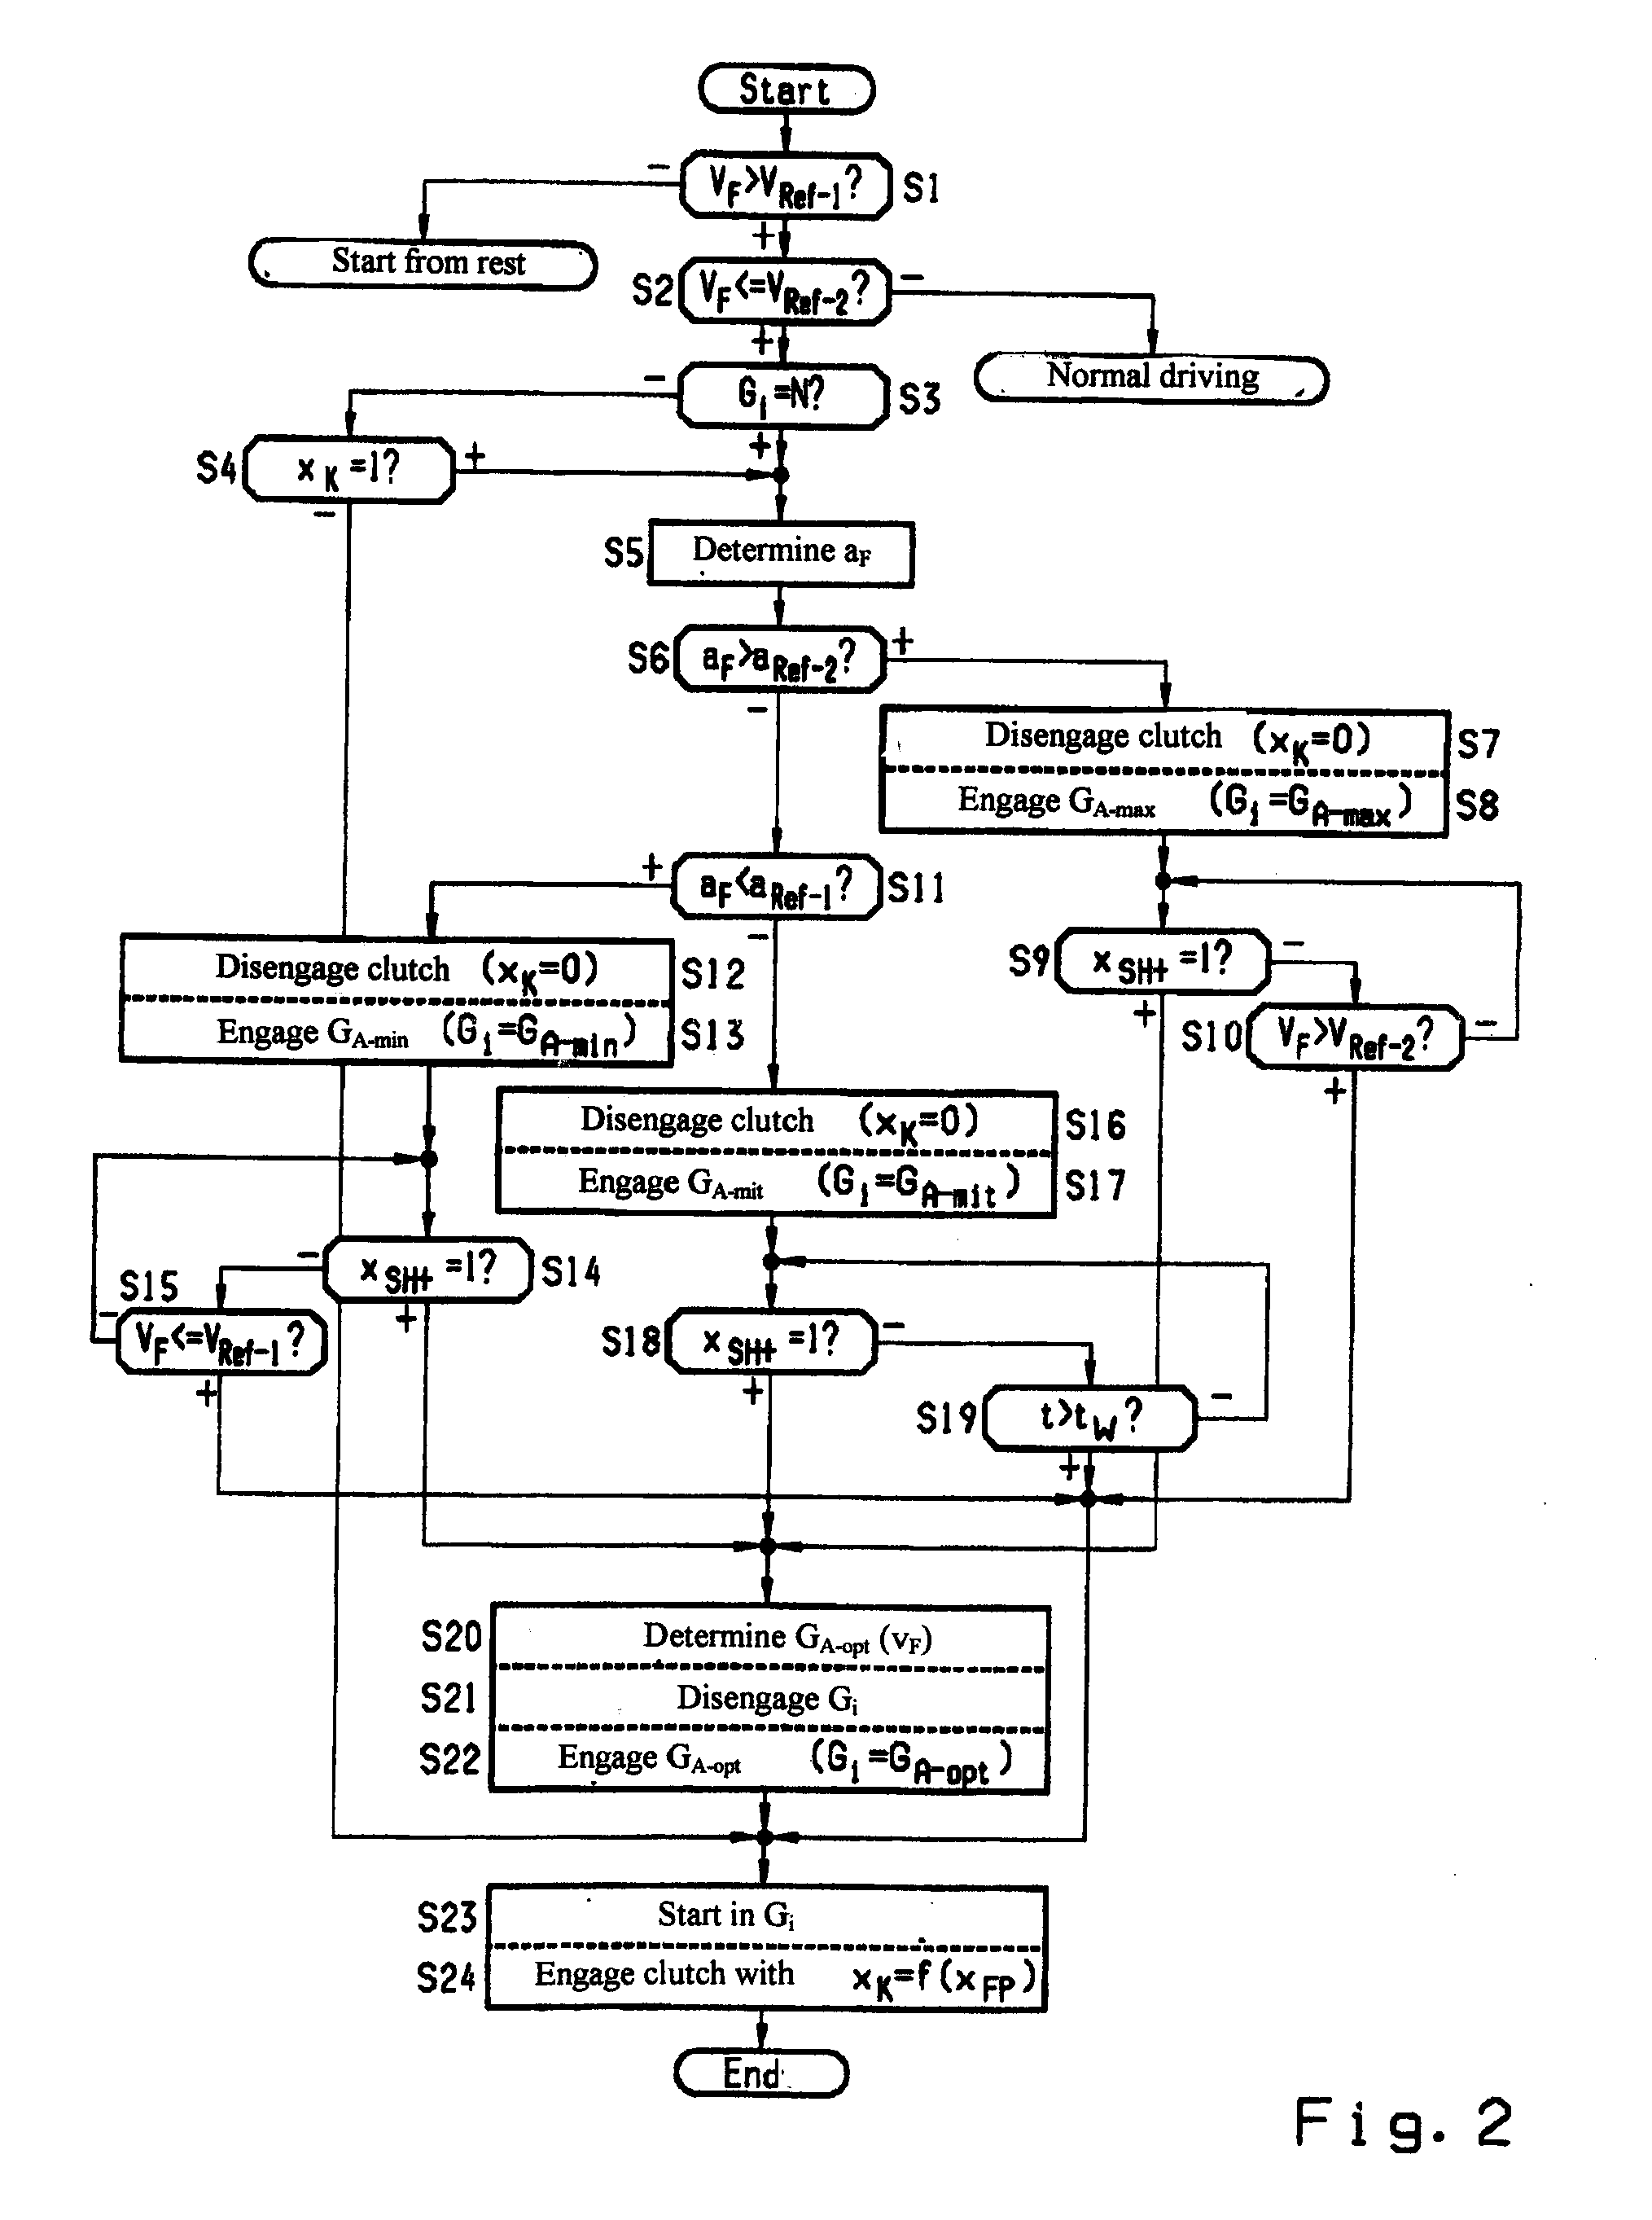 Method for controlling a drive train of a motor vehicle